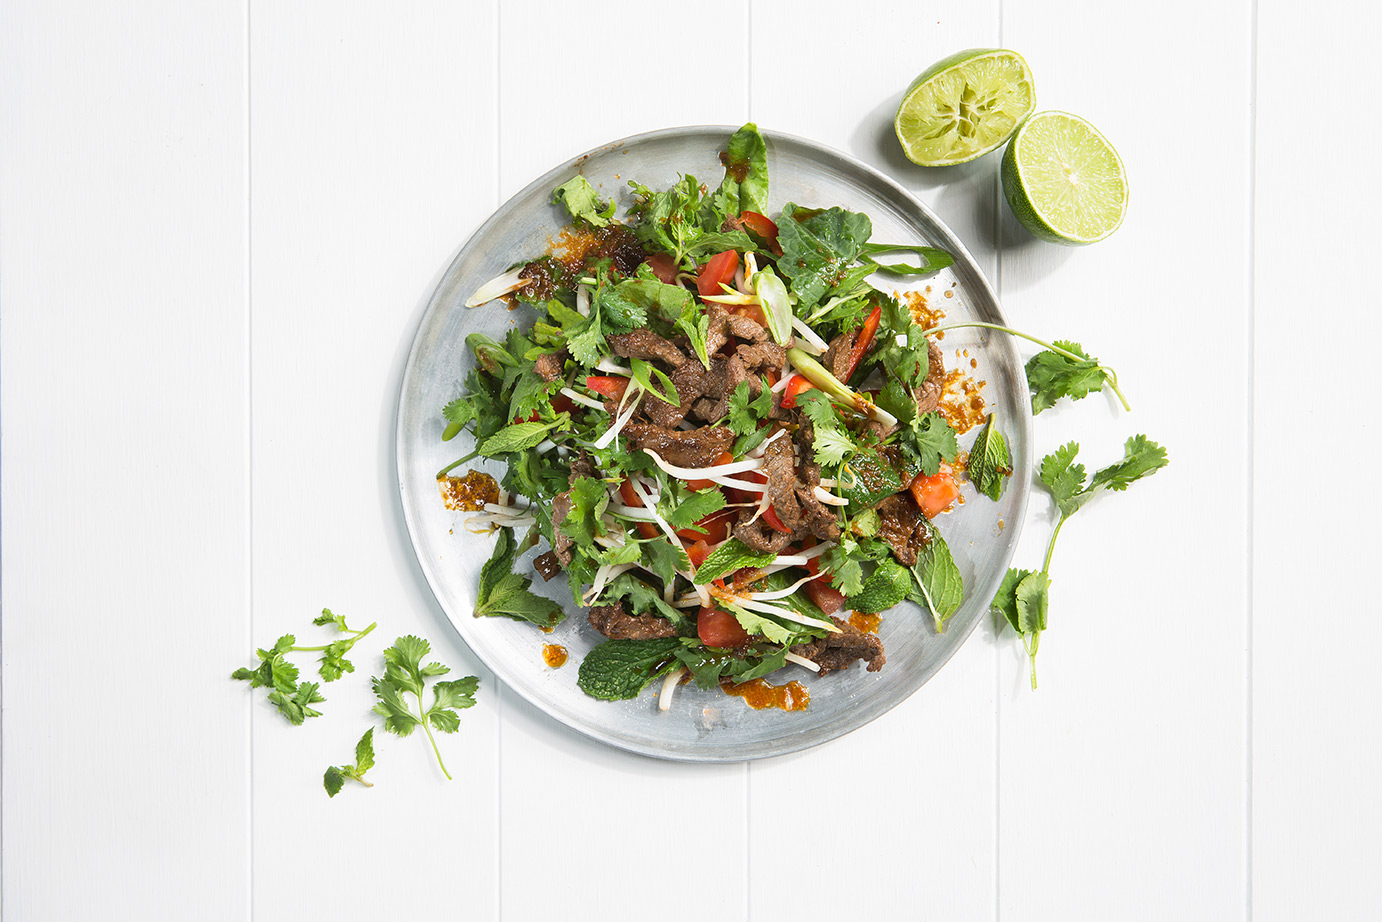 Image of thai beef salad on a silver serving plate with two lime wedges to serve.